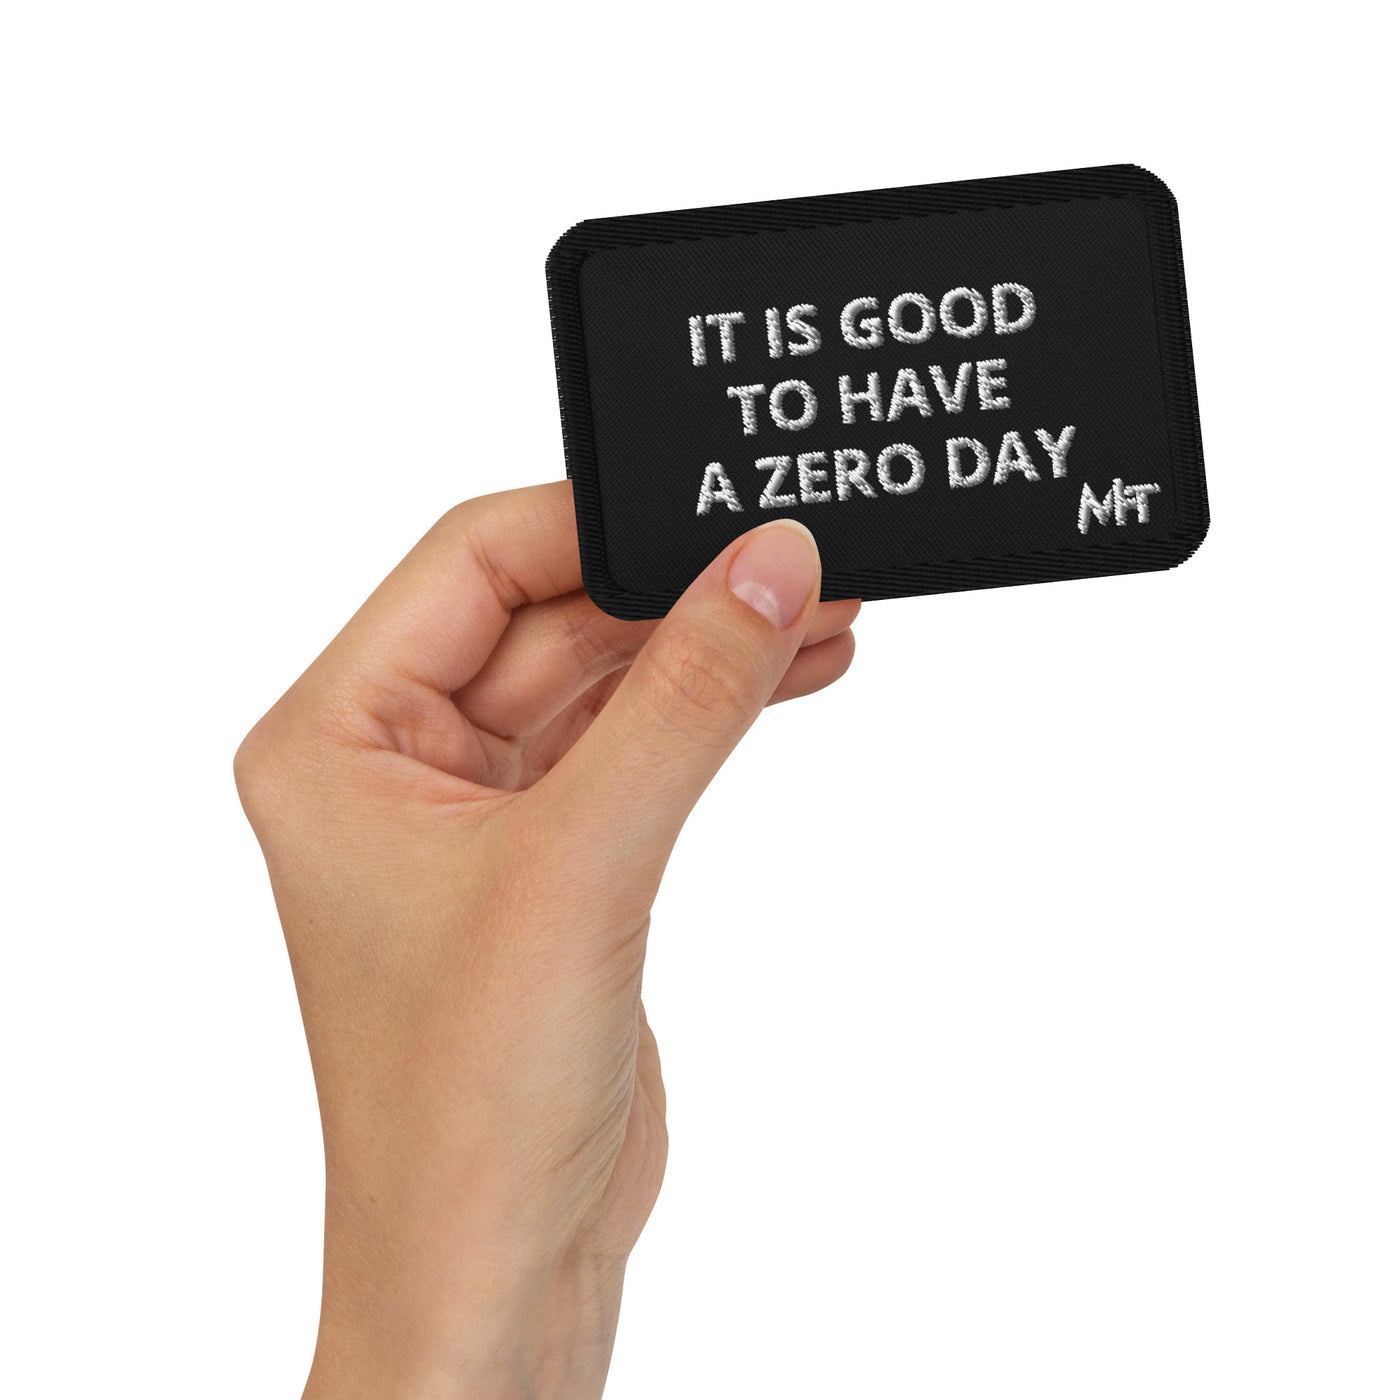 It is a good day to have a zero day - Embroidered patches